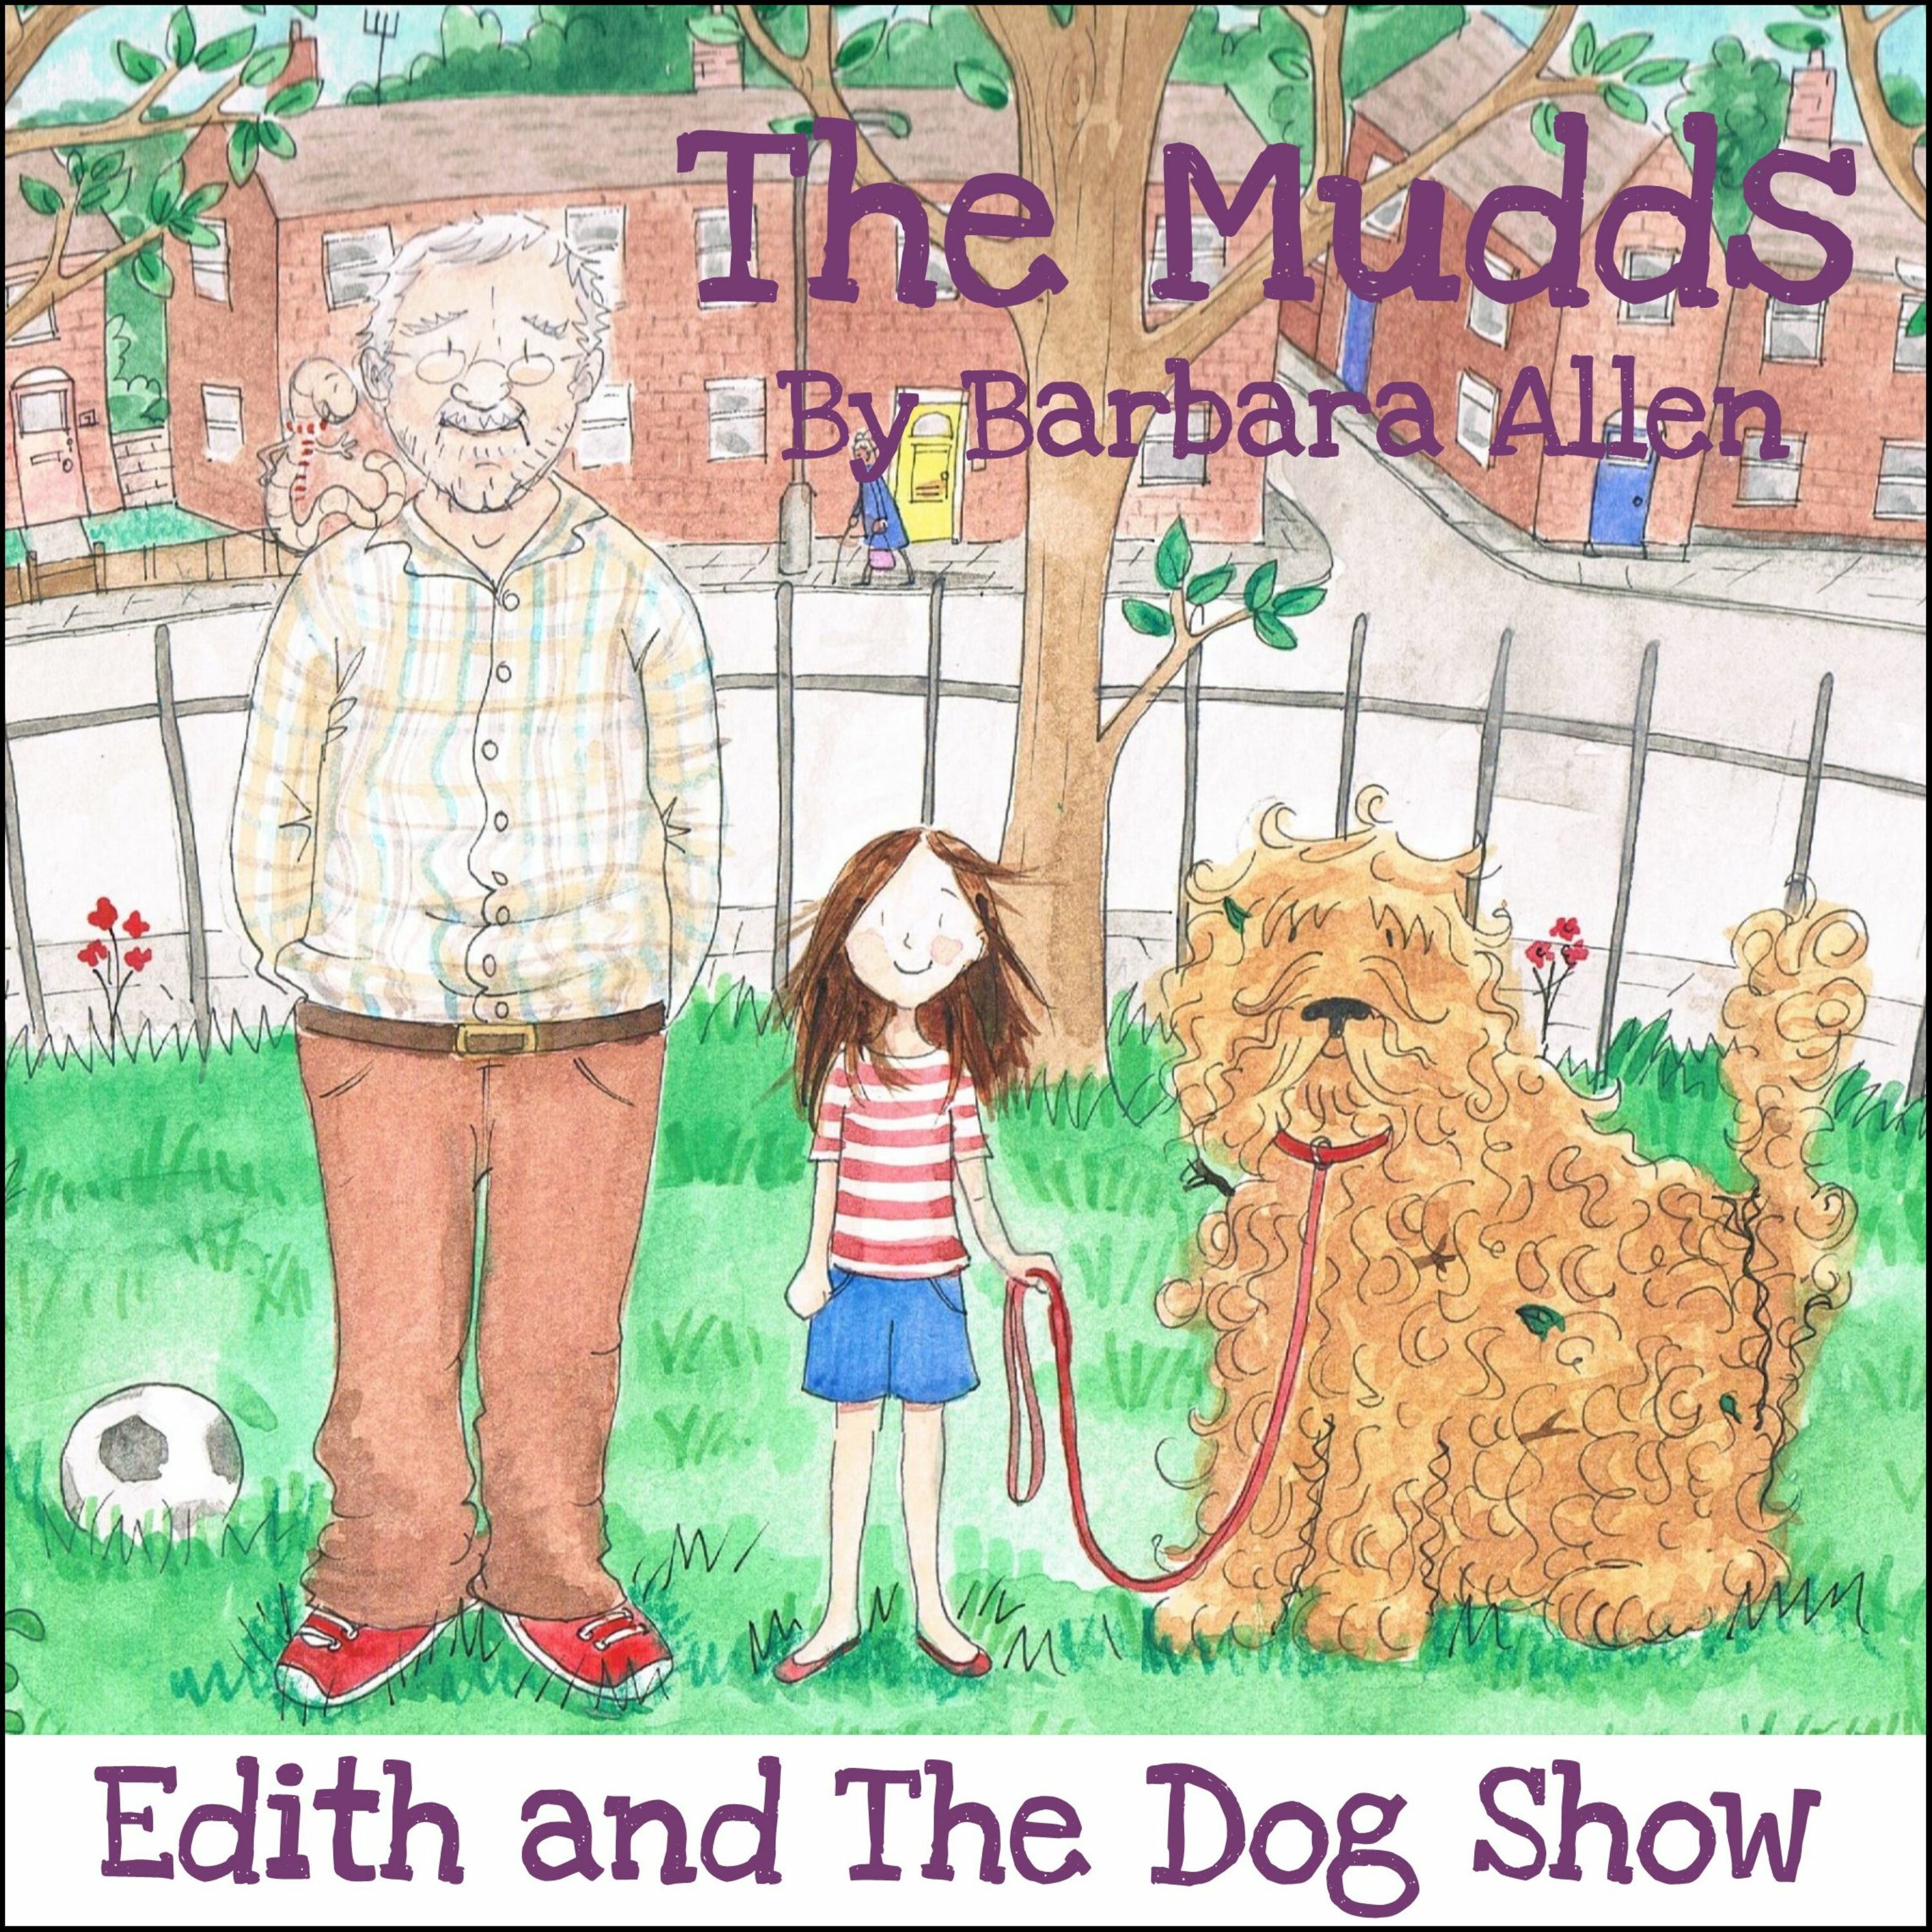 Edith and the Dog Show